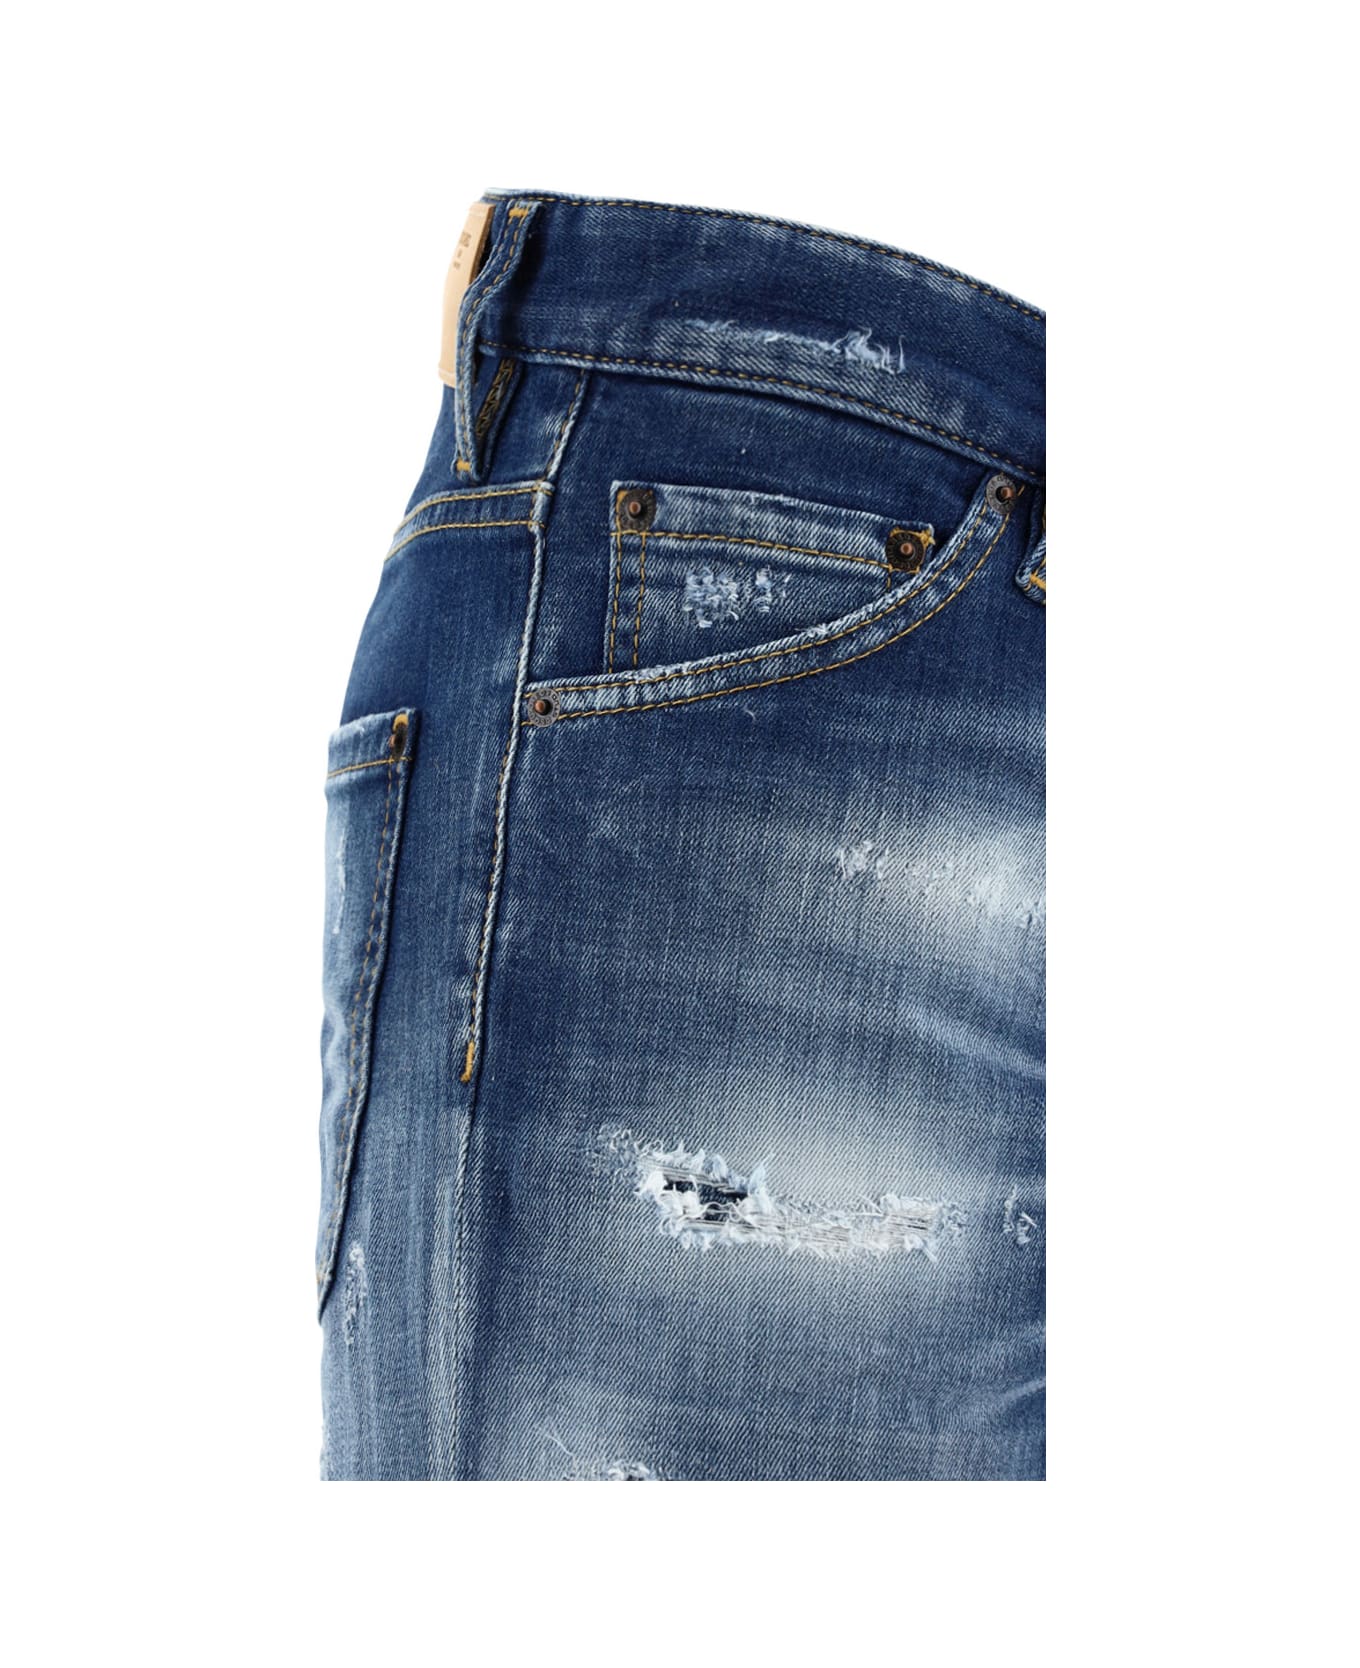 Dsquared2 Jeans - 470